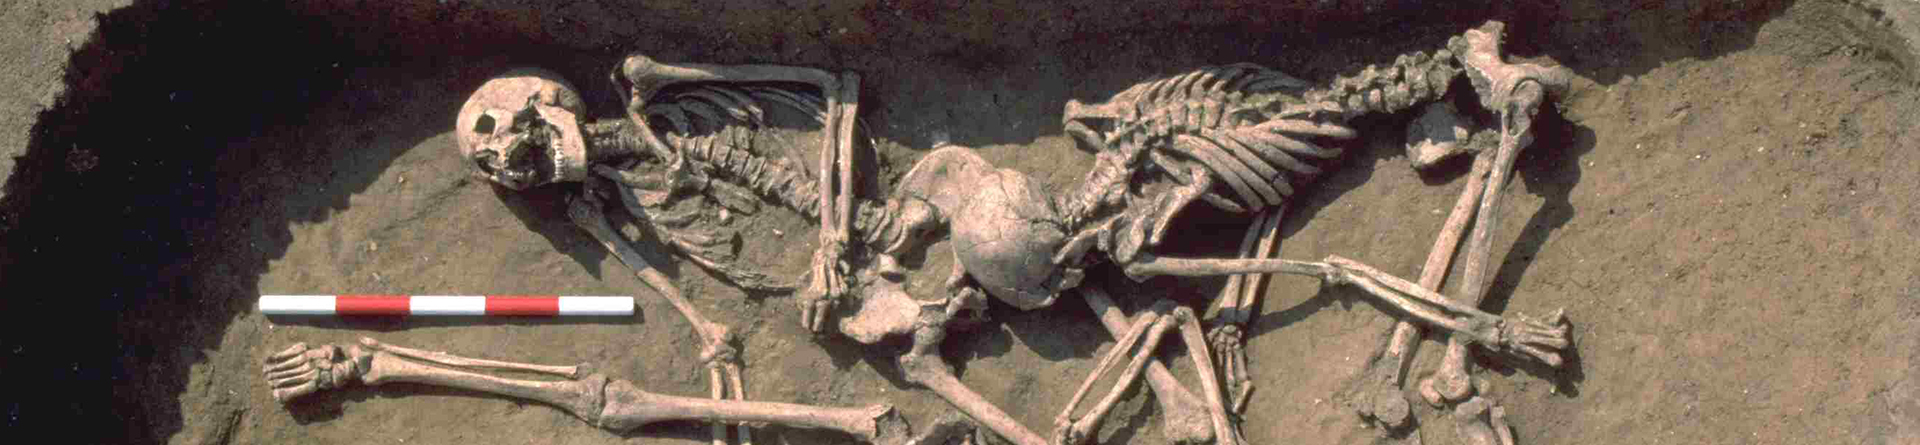 A triple burial dating to the Roman period, being excavated at Stanwick, Northamptonshire.